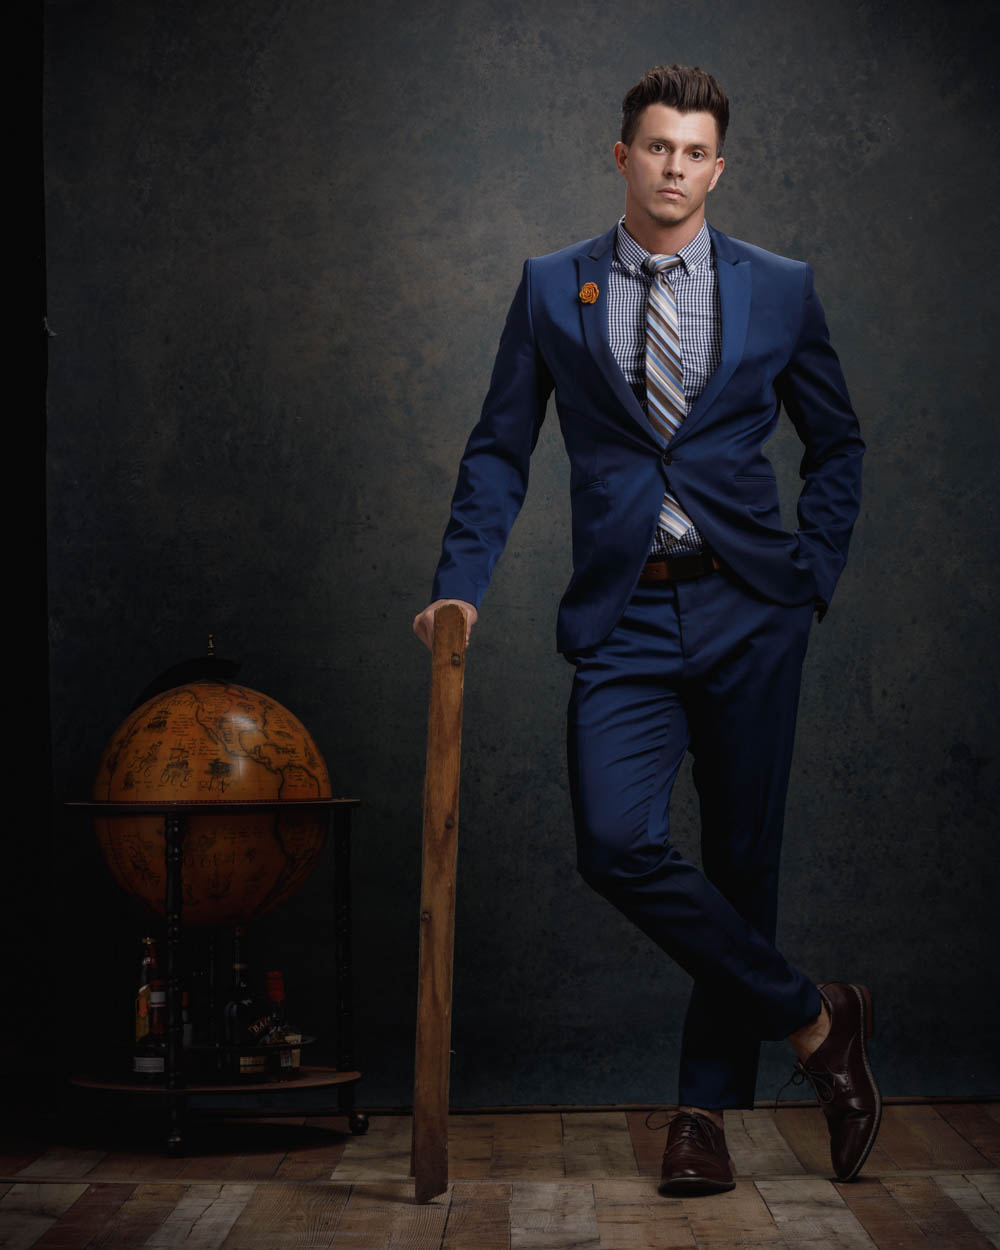 Model Kenny posing in a stylish blue suit for a model portfolio in Chicago, exemplifying professional attire and pose